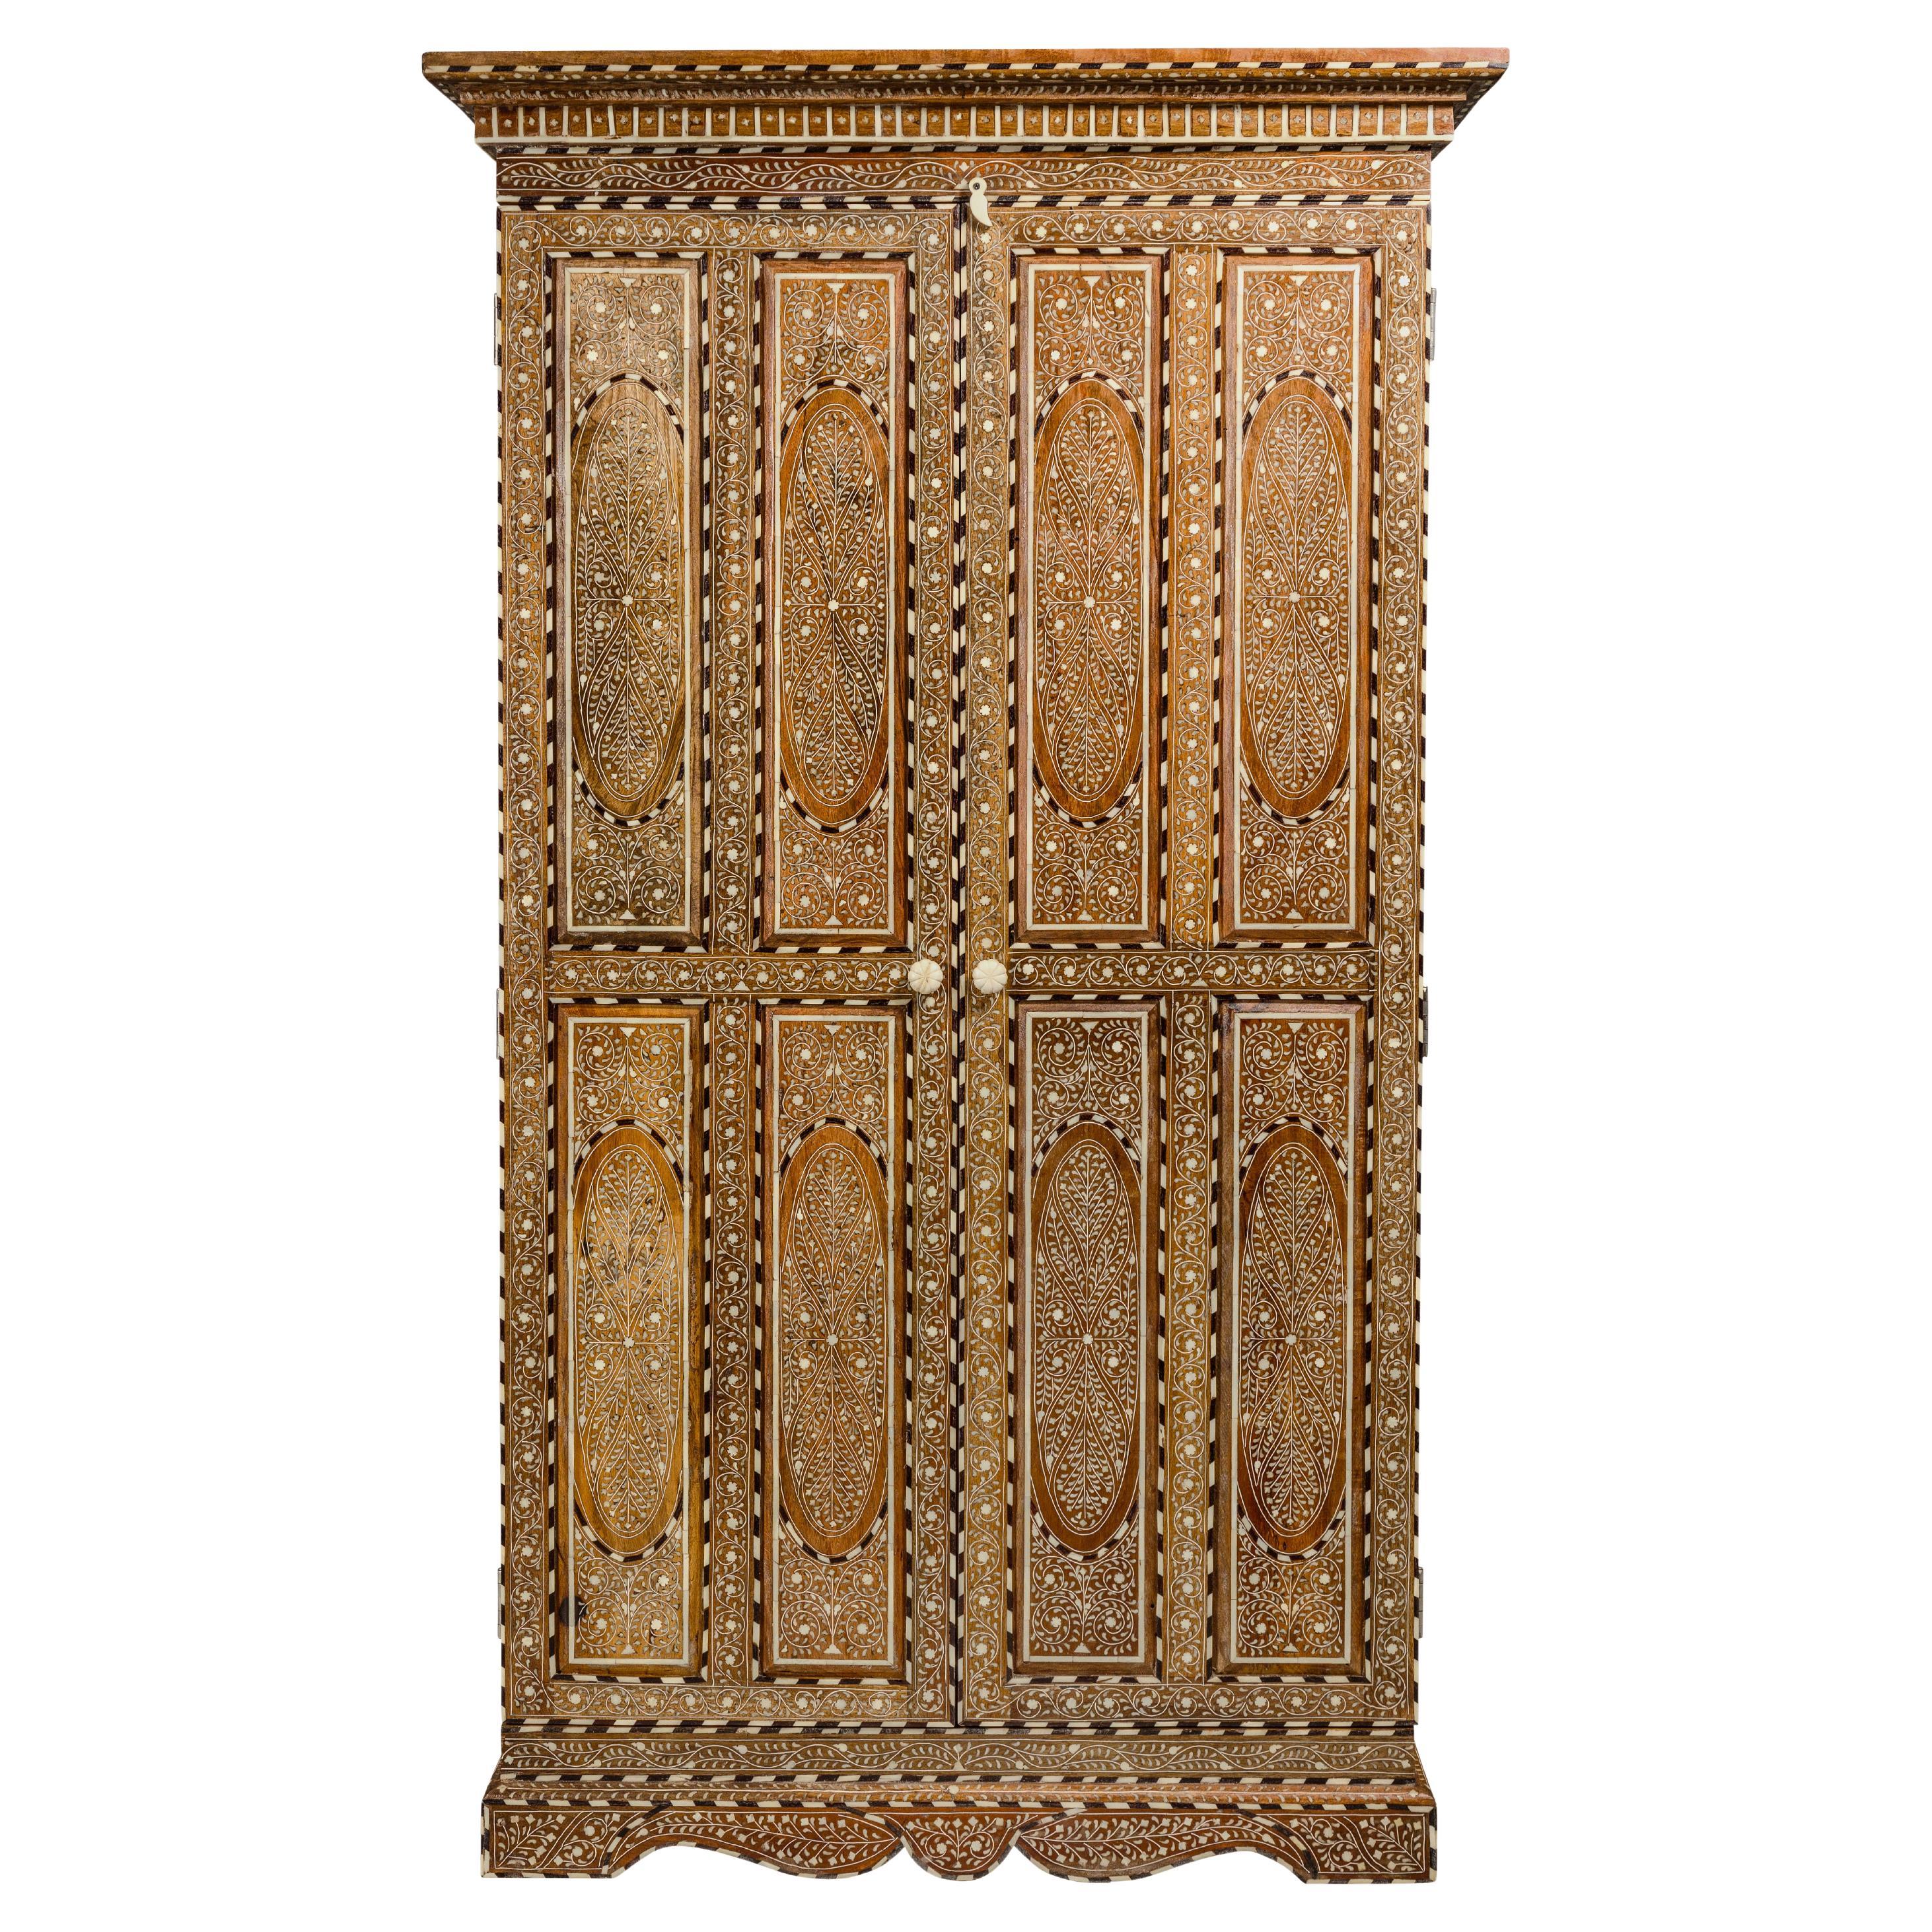 Anglo Indian Style Mango Wood Tall Cabinet mit Floral Themed Bone Intarsien Dekor